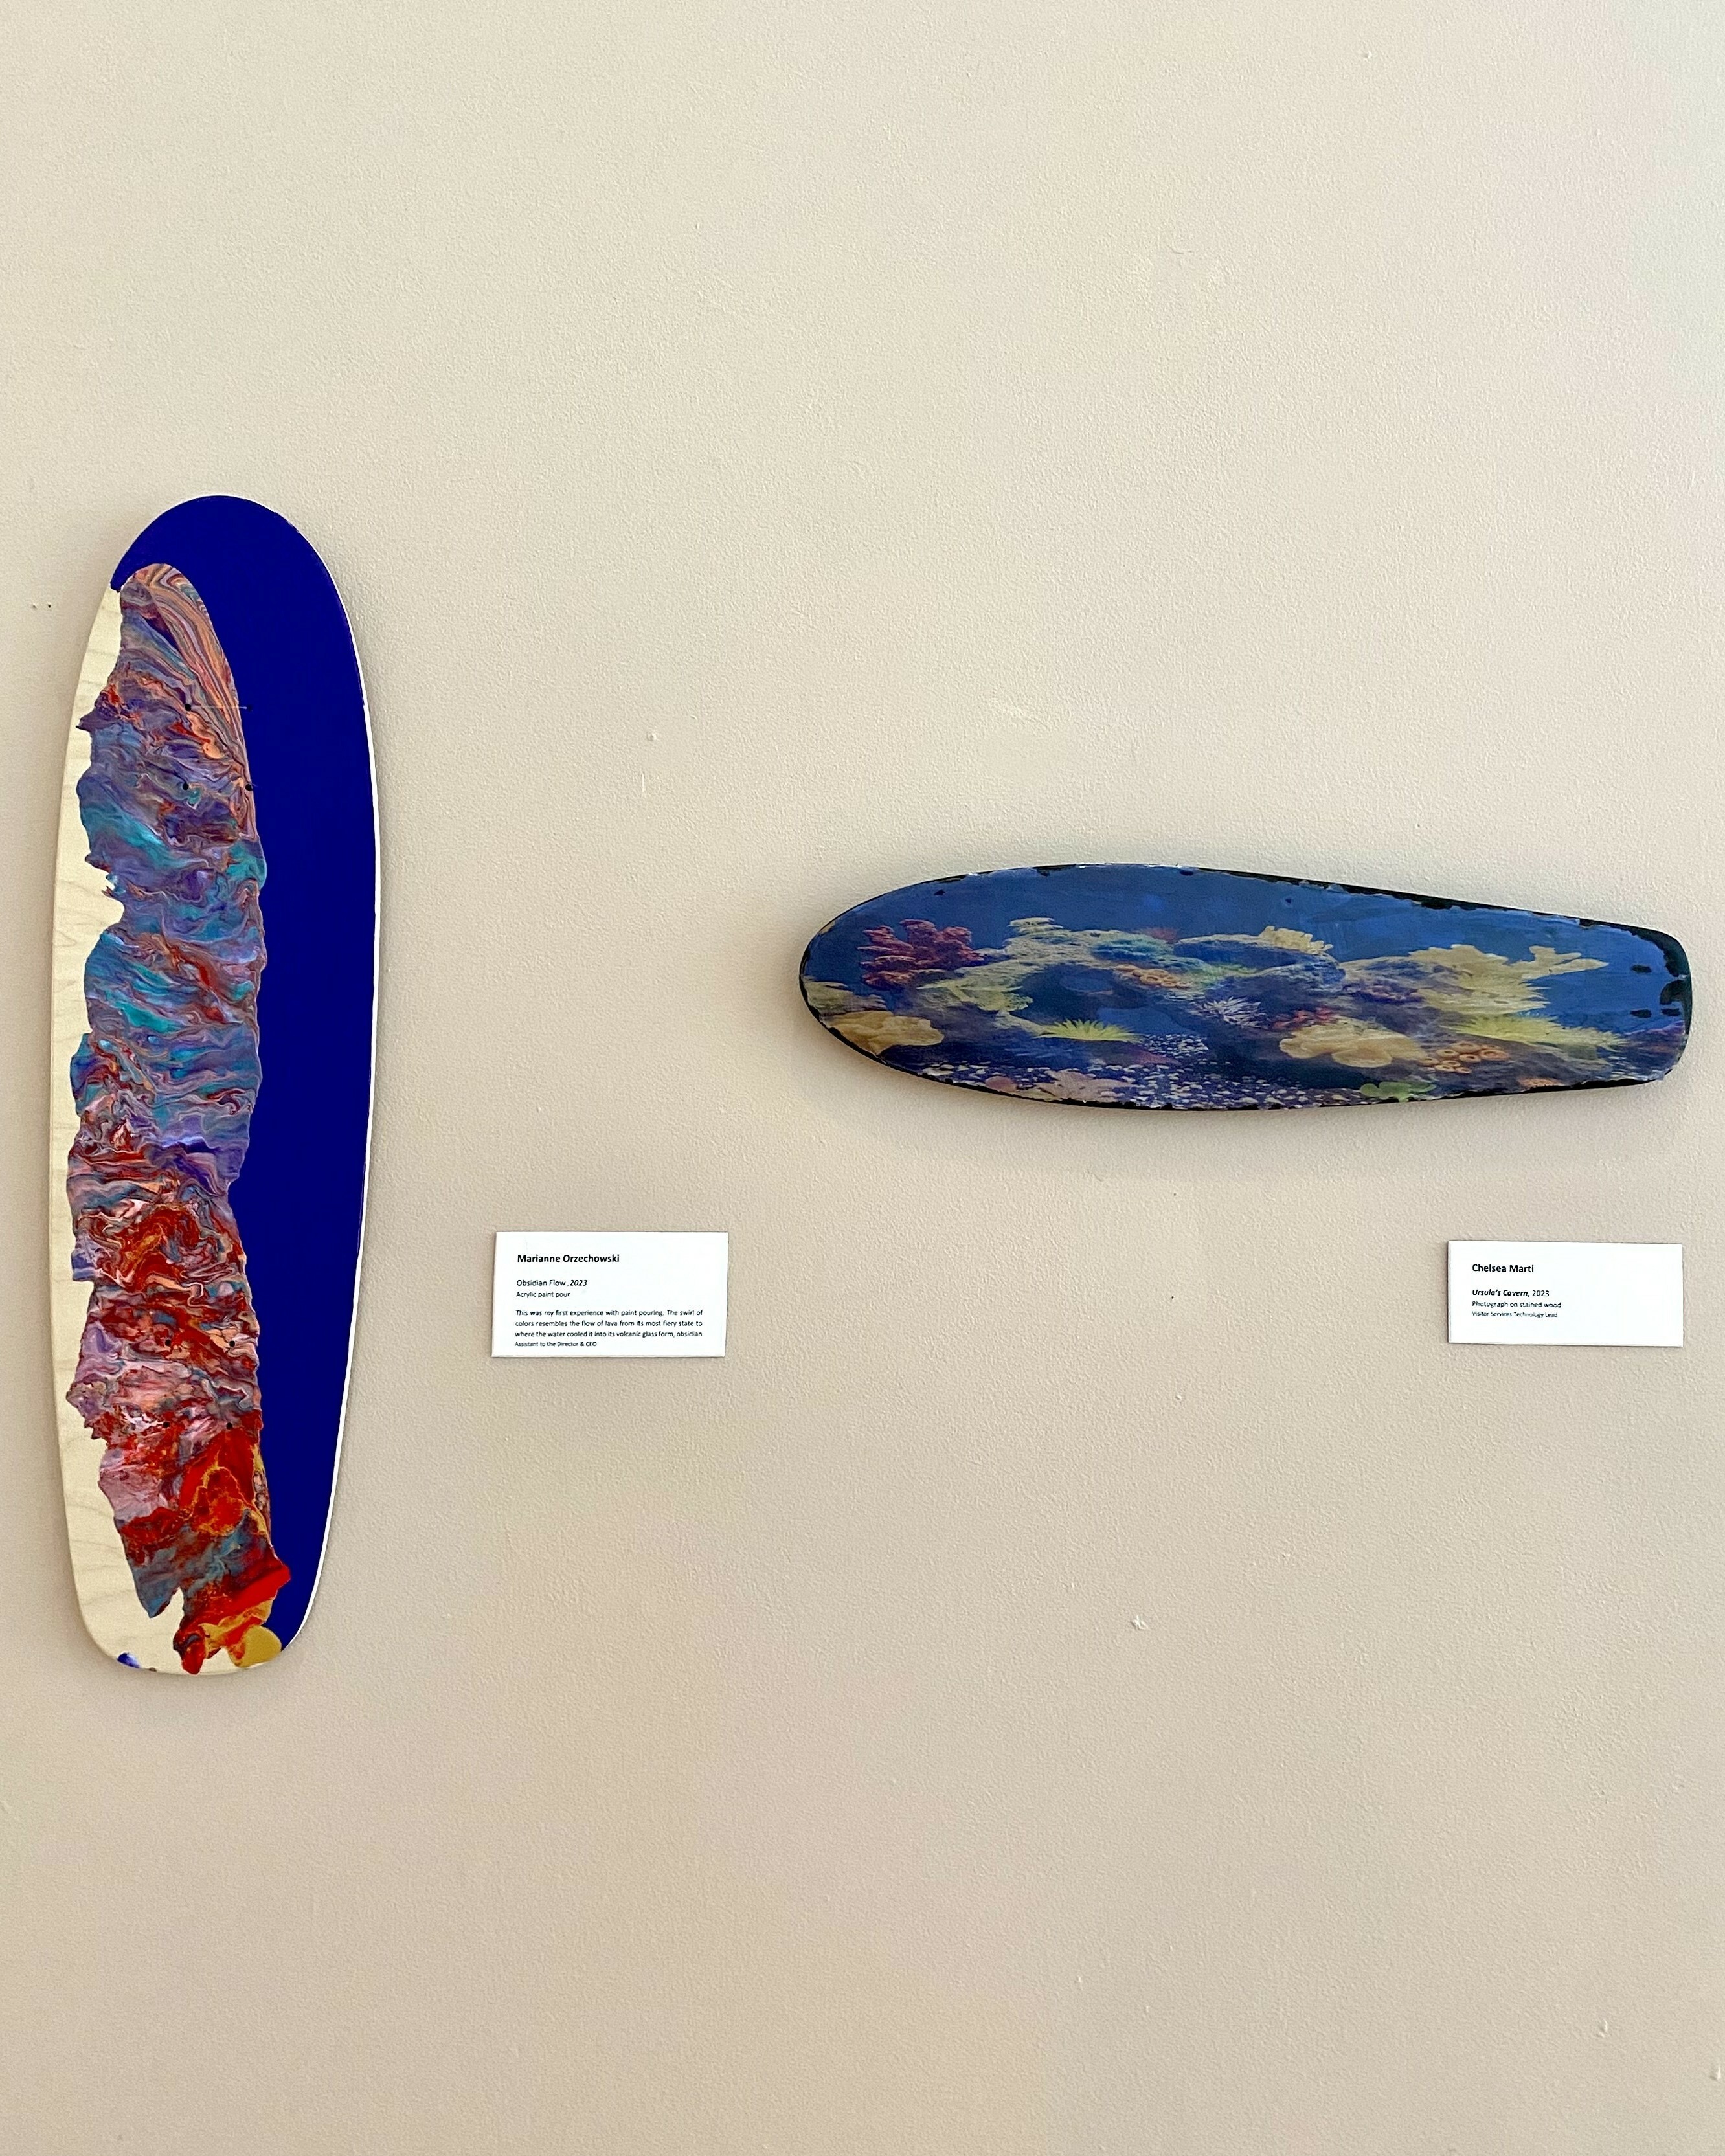 (Left) Marianne Orzechowski, "Obsidian Flow," 2023, Acrylic paint pour; (Right) Chelsea Marti, "Ursula's Cavern," 2023, Photograph on stained wood